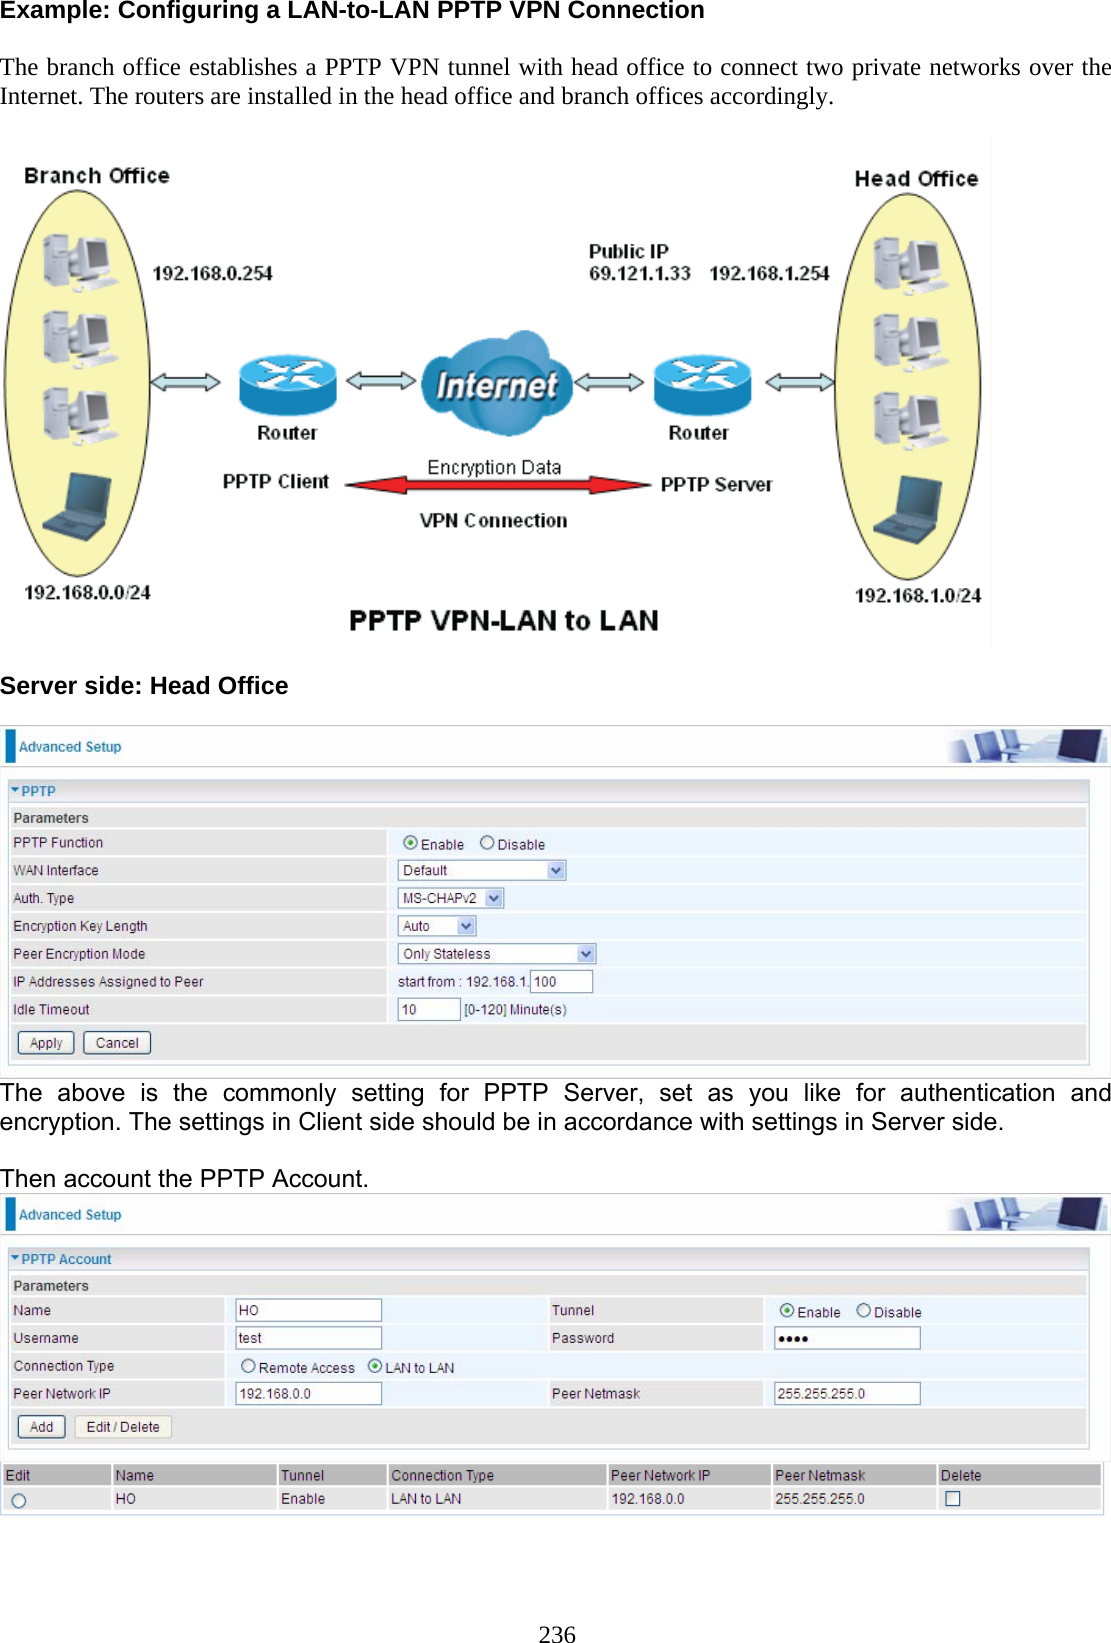 236 Example: Configuring a LAN-to-LAN PPTP VPN Connection  The branch office establishes a PPTP VPN tunnel with head office to connect two private networks over the Internet. The routers are installed in the head office and branch offices accordingly.    Server side: Head Office   The above is the commonly setting for PPTP Server, set as you like for authentication and encryption. The settings in Client side should be in accordance with settings in Server side.  Then account the PPTP Account.       